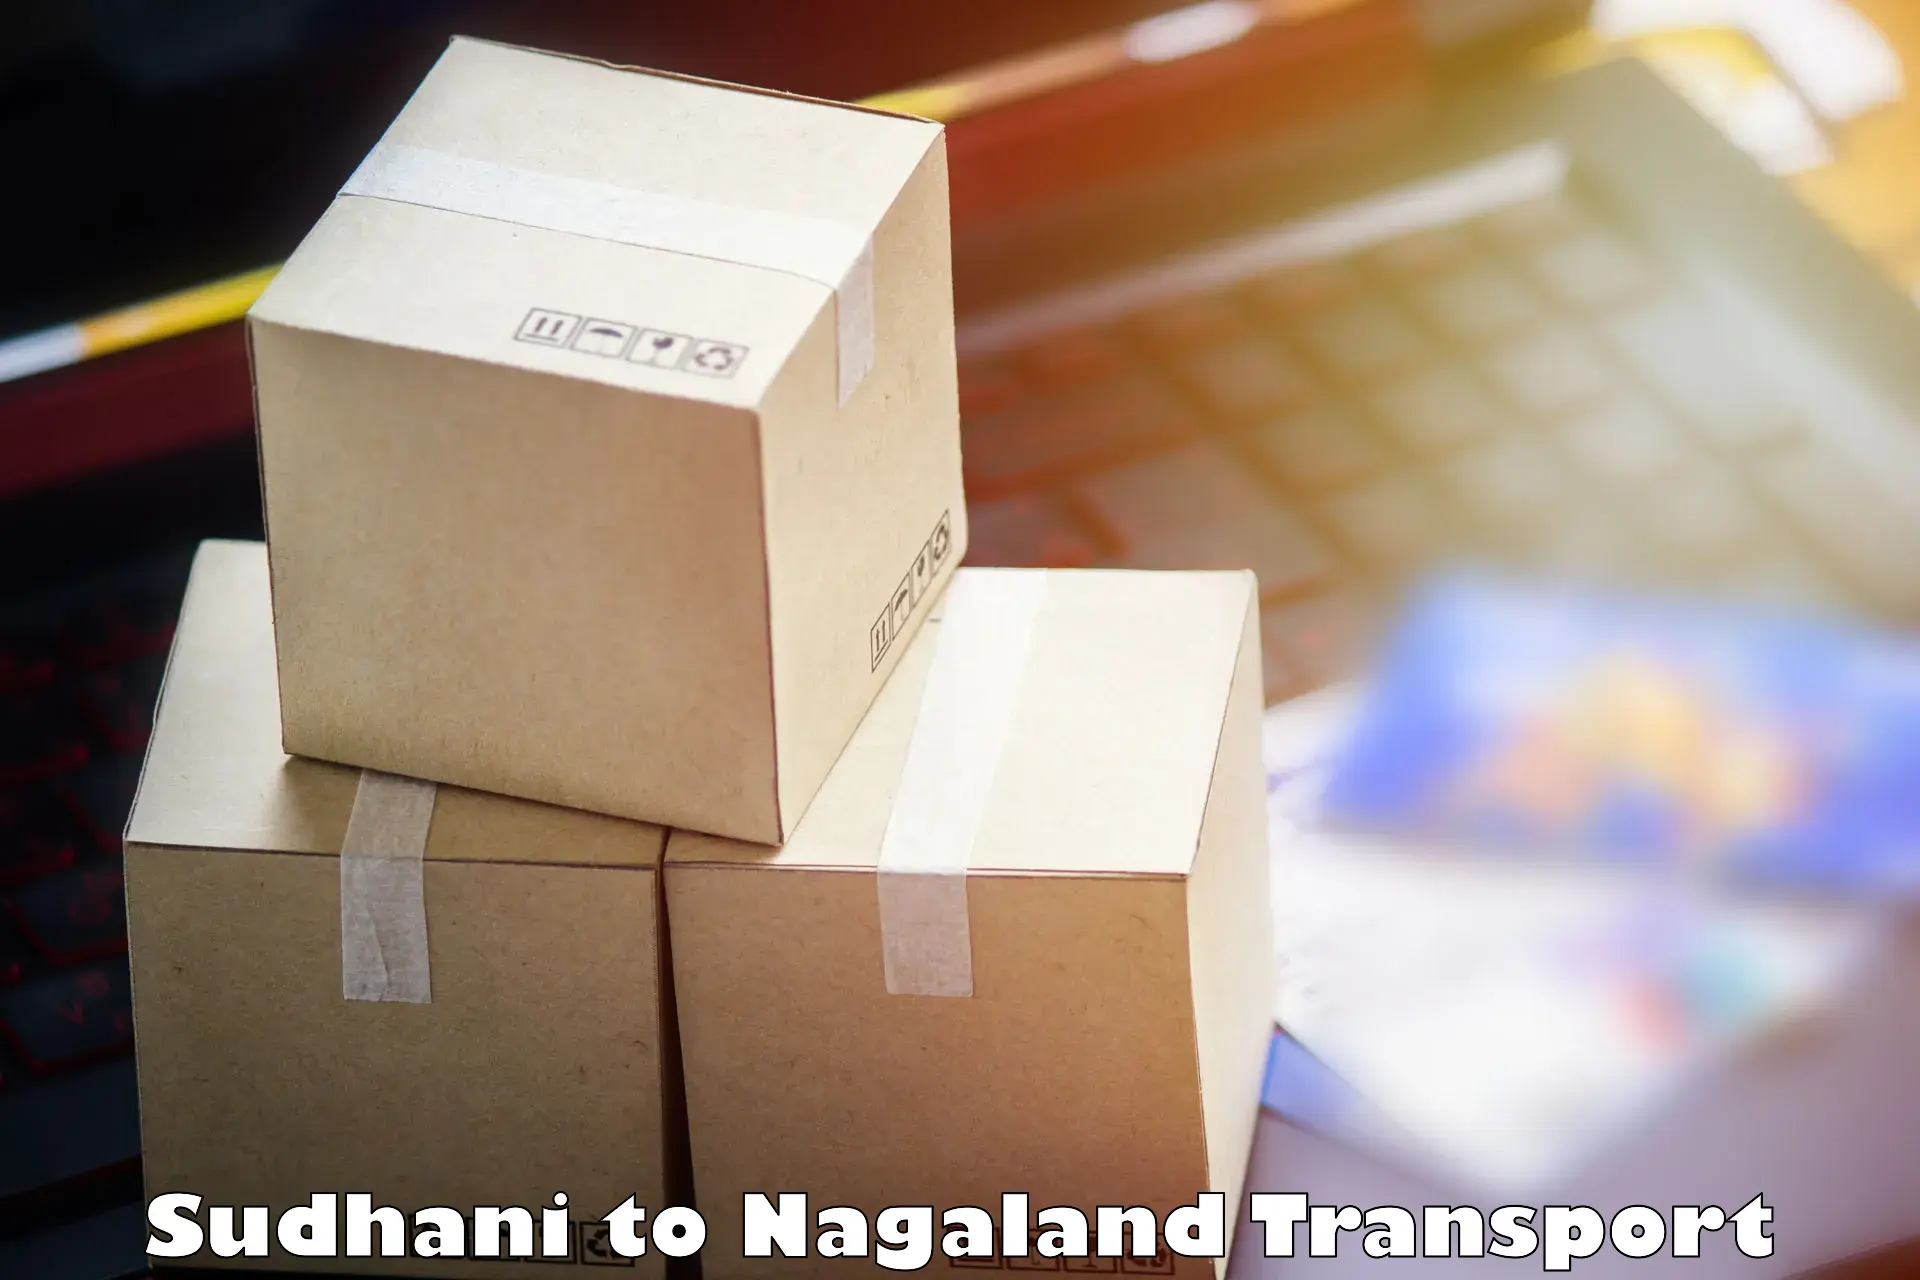 Express transport services Sudhani to Nagaland